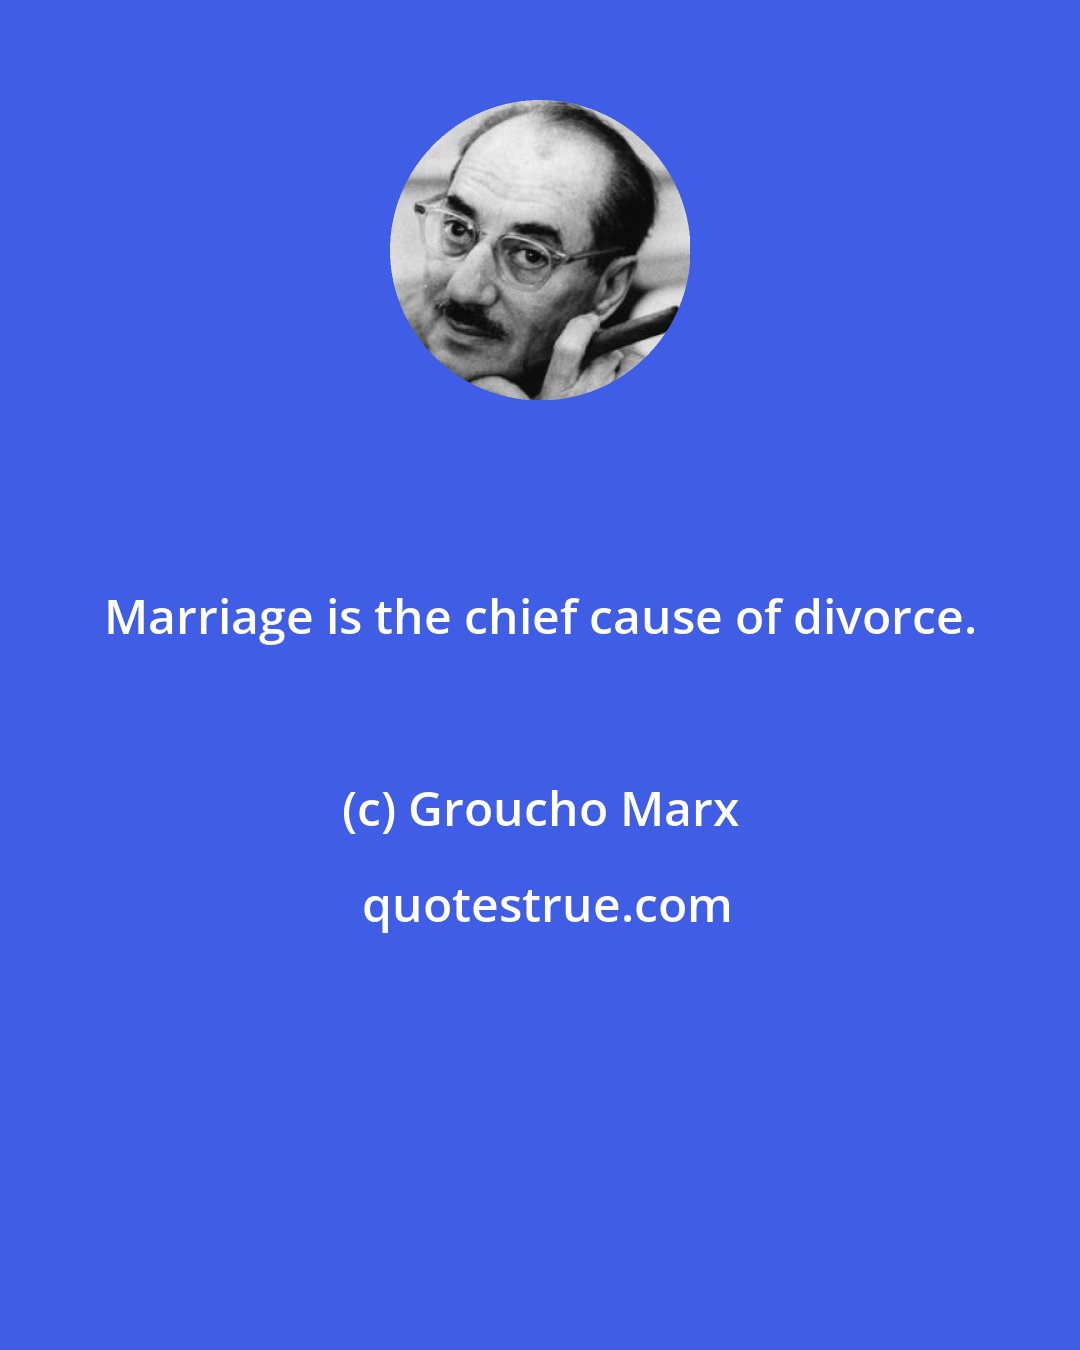 Groucho Marx: Marriage is the chief cause of divorce.